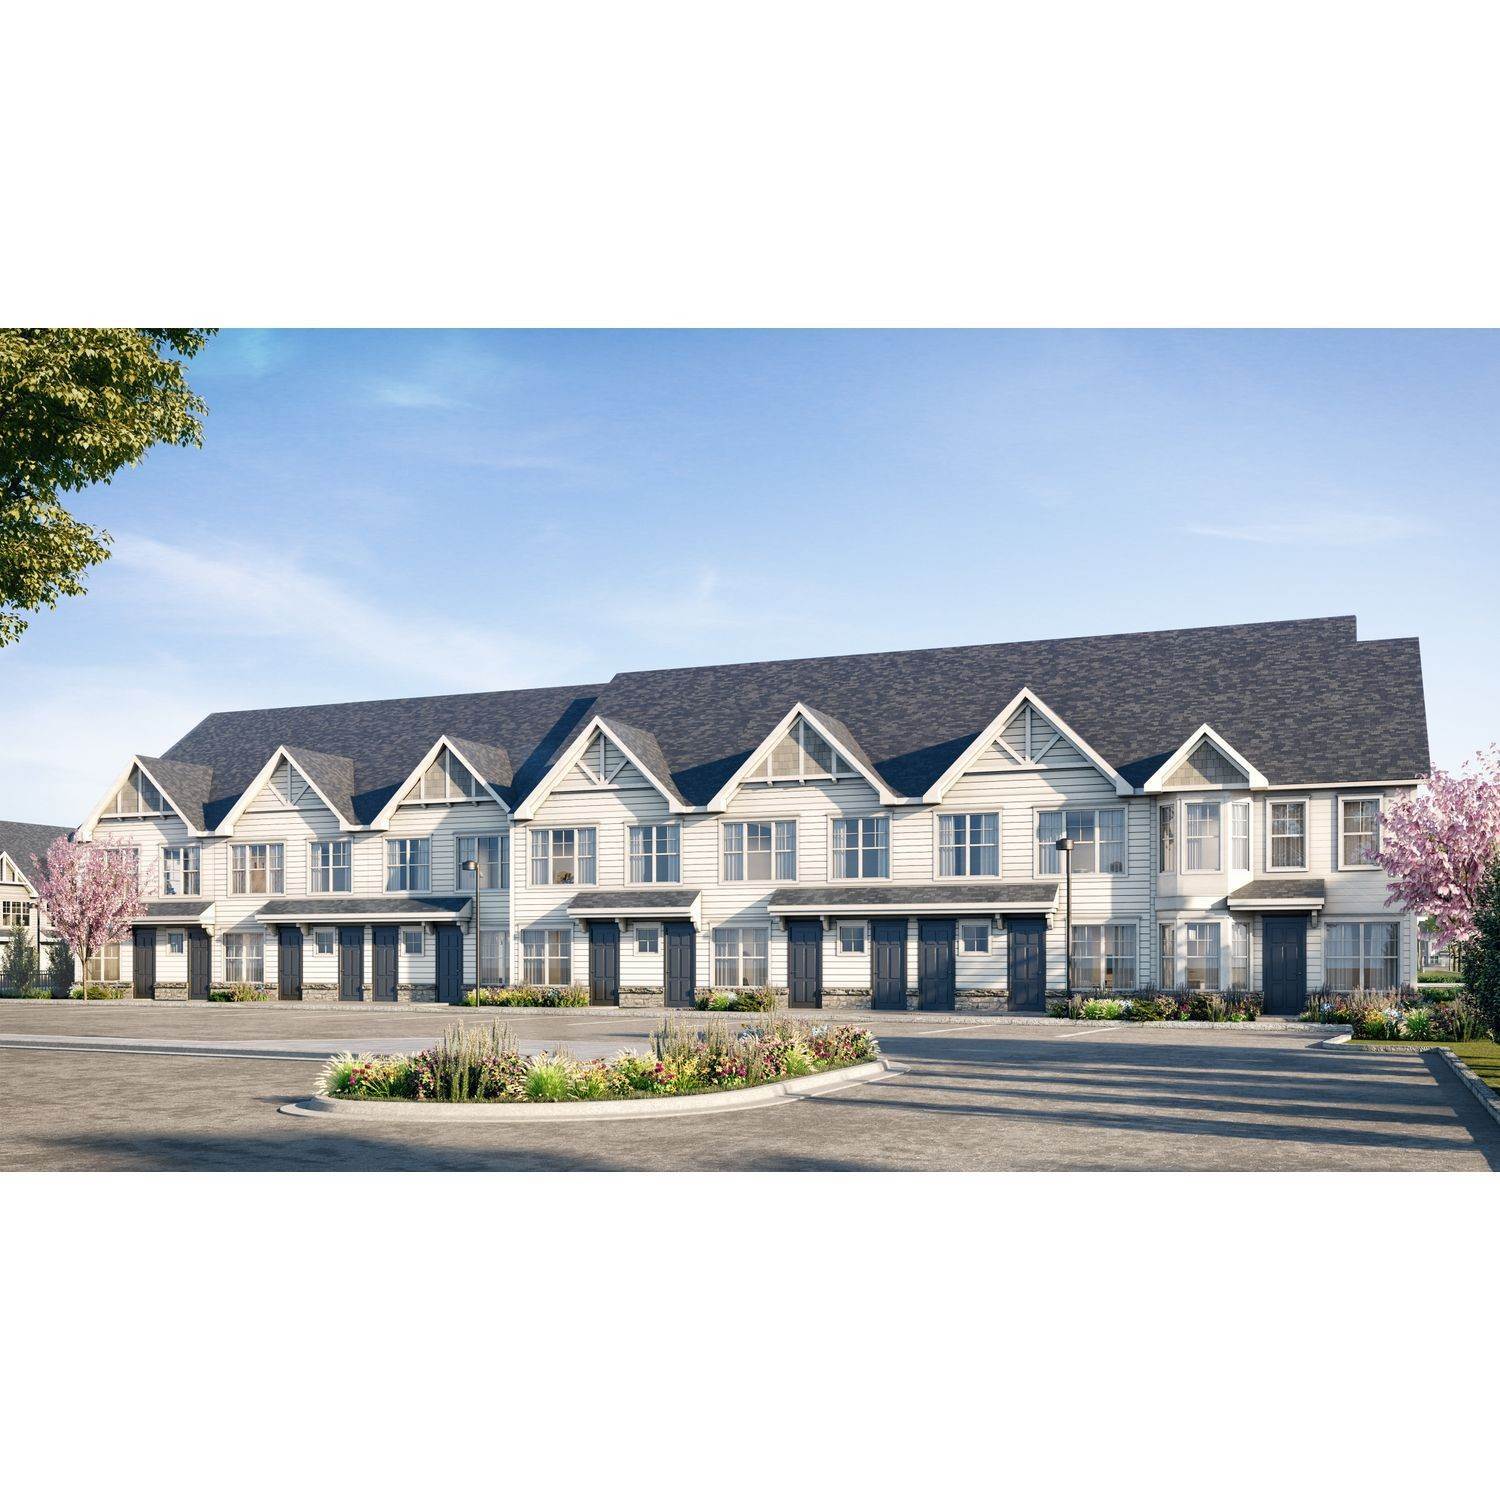 2. Meadowbrook Pointe East Meadow xây dựng tại 123 Merrick Avenue, East Meadow, NY 11554